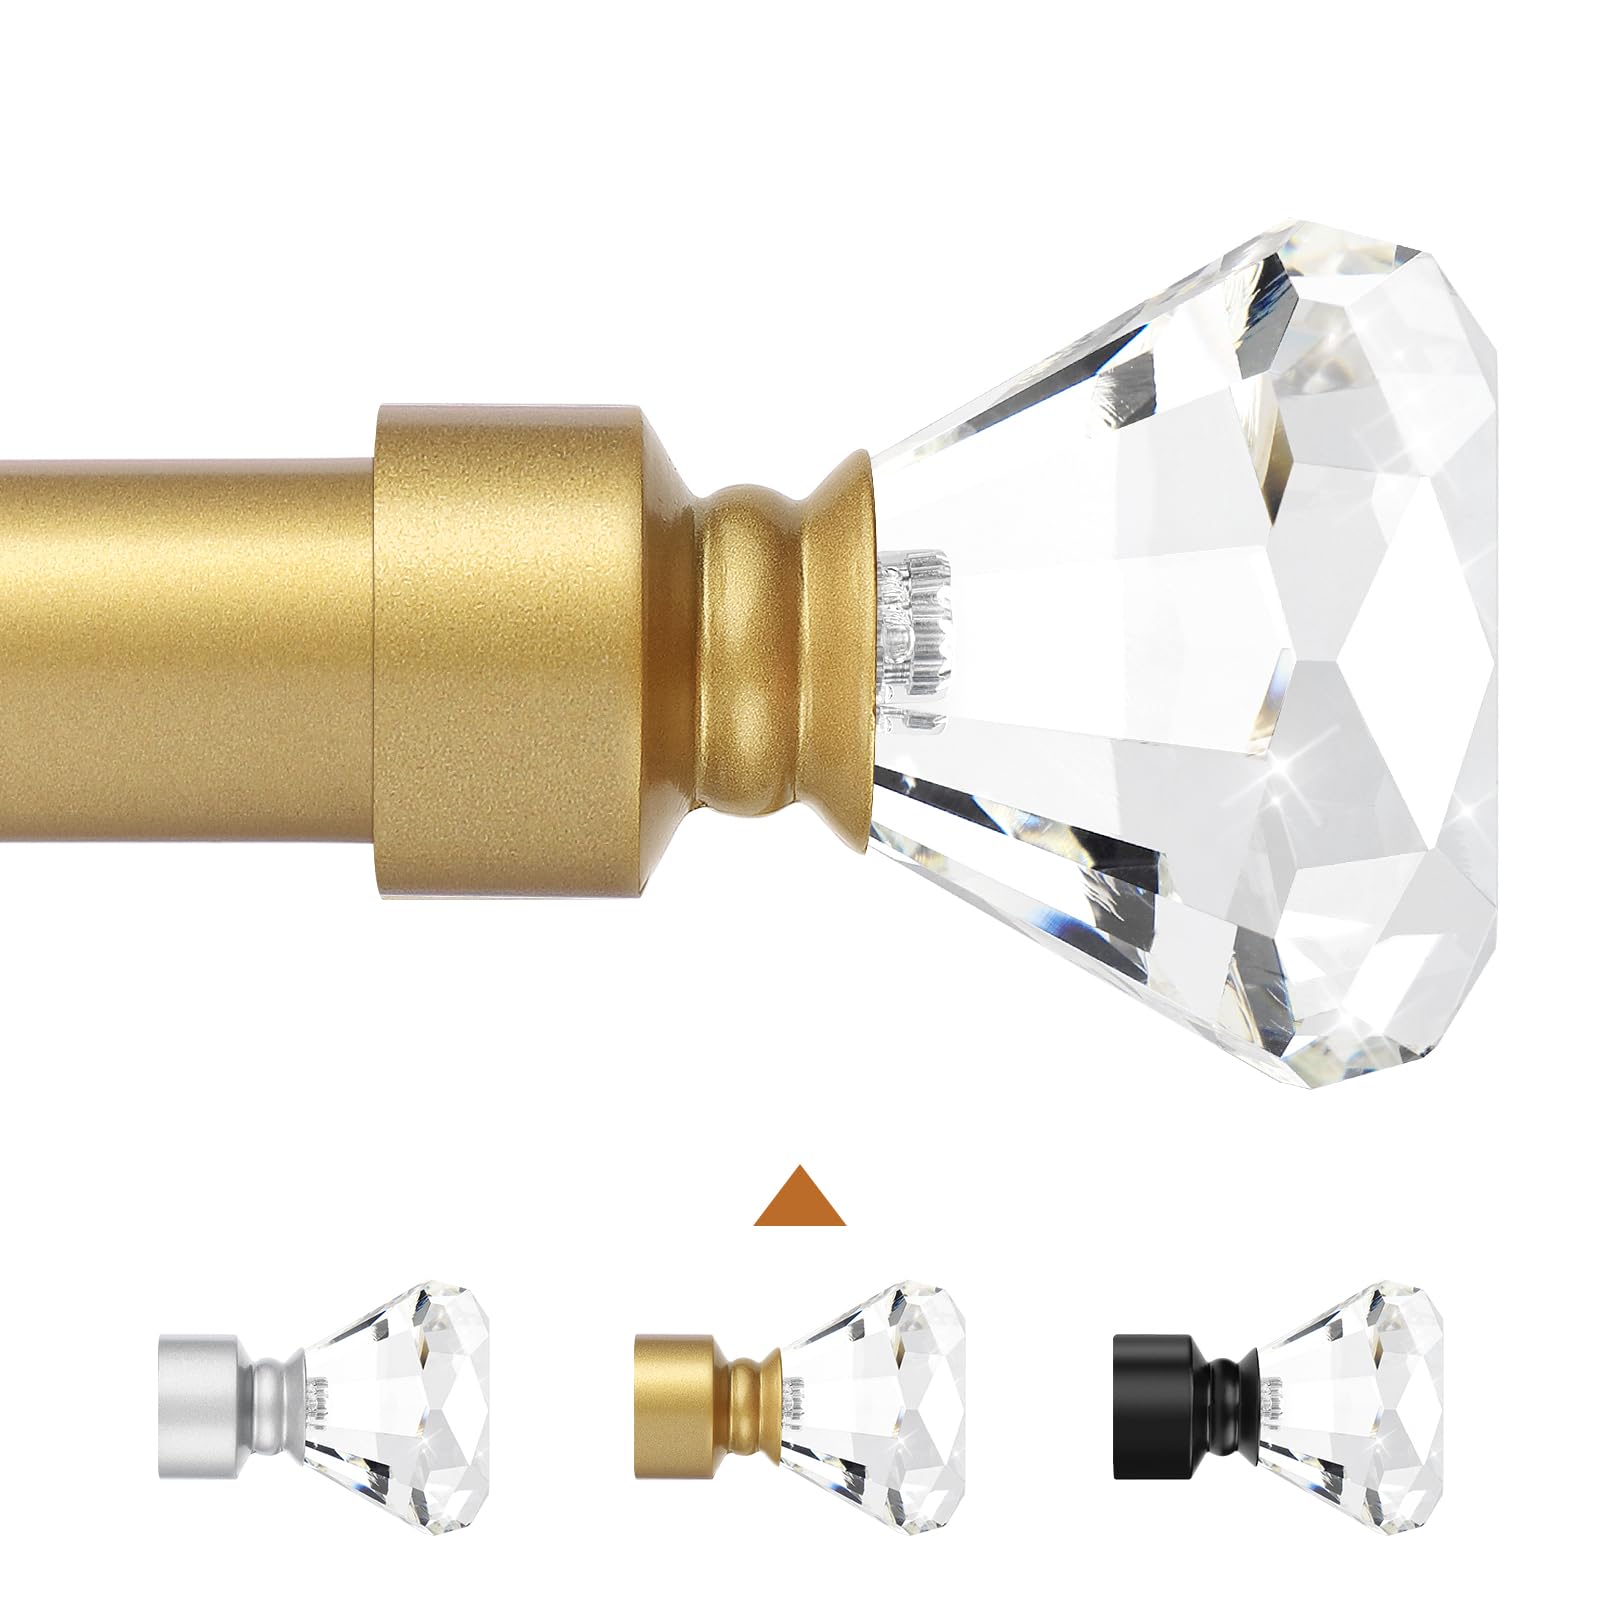 Elite Gold 1 Pack Window Treatment Single Curtain Rods Adjule Rod From 48 To 86 Inches With Crystal Finial Fini